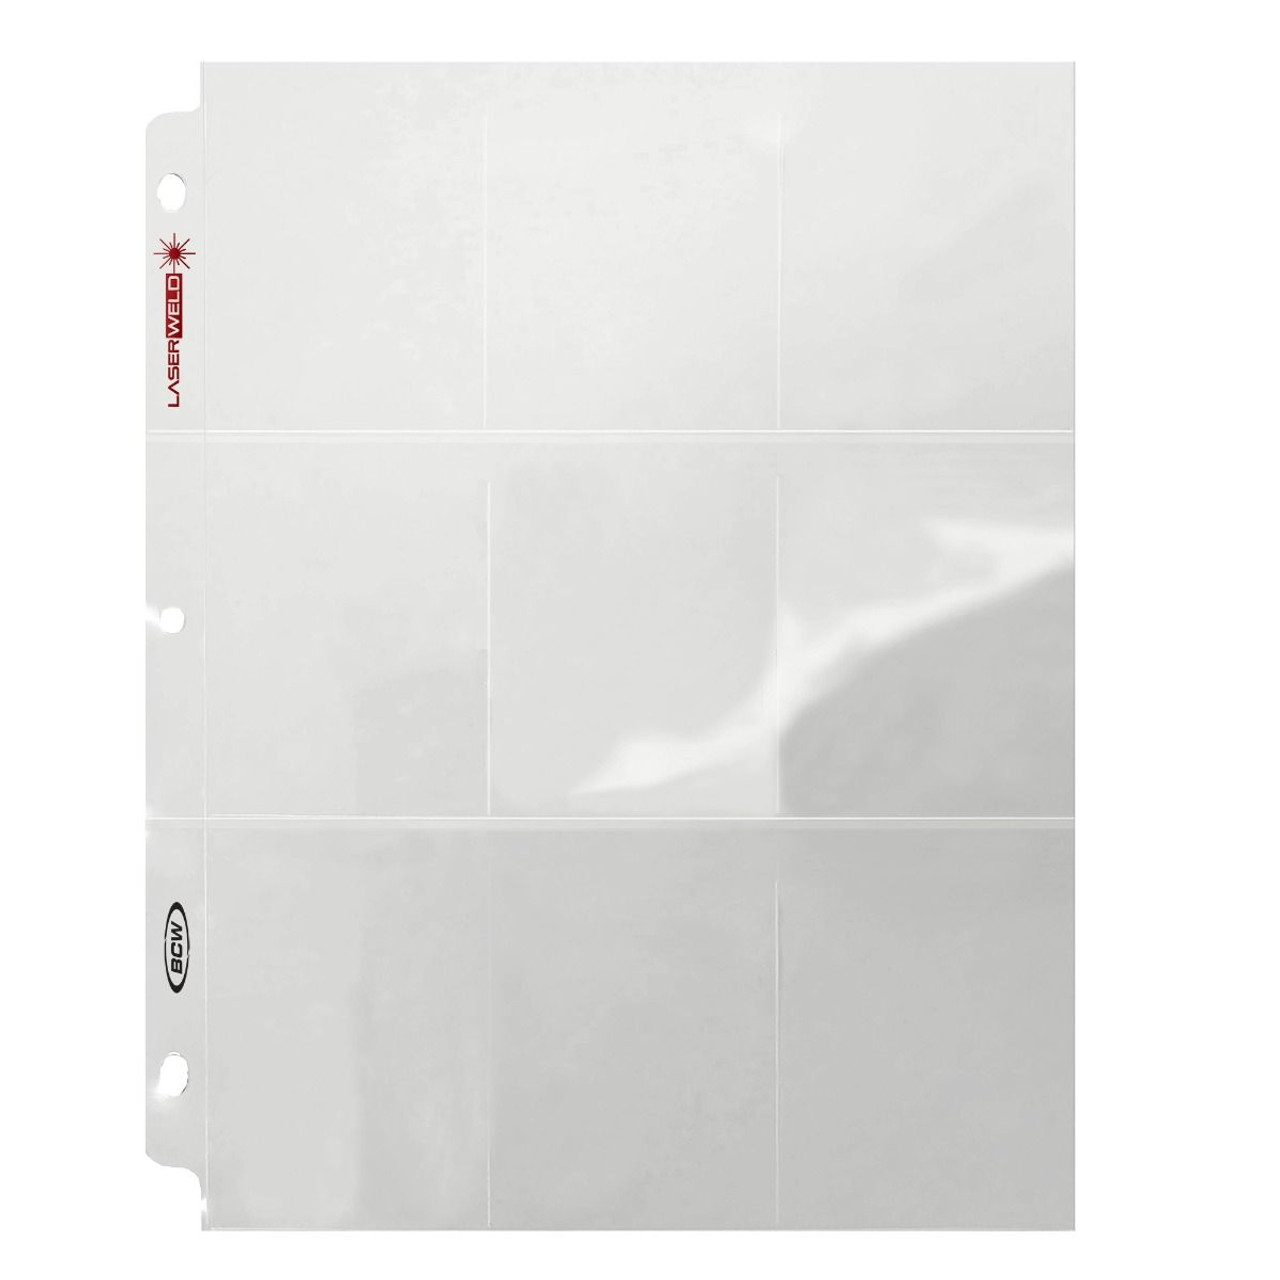 BCW LaserWeld 9-Pocket Pages 100ct Box / Case of 10